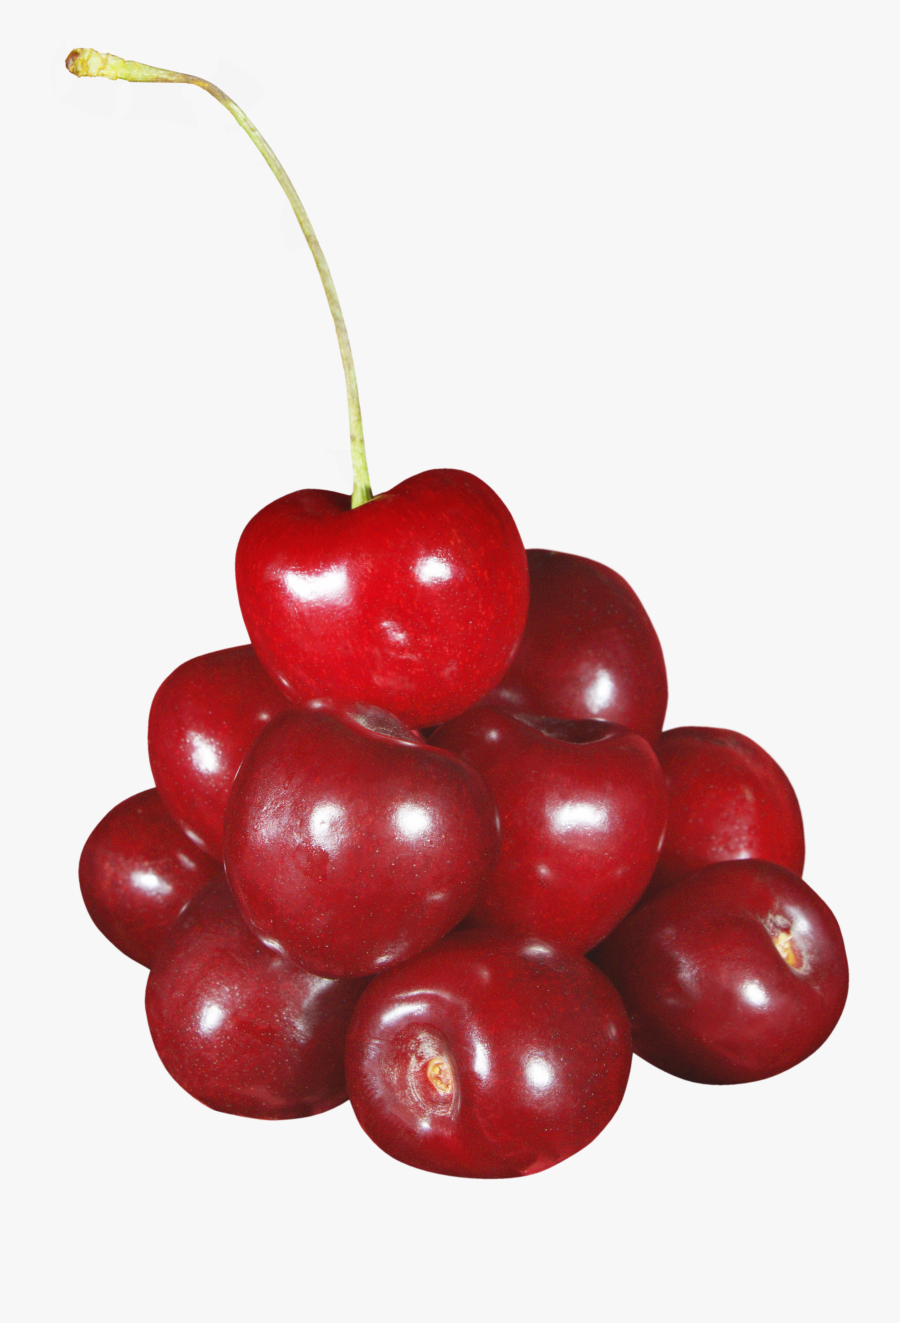 Cherries And Apple Clipart Black And White - Cherries Png No Background, Transparent Clipart